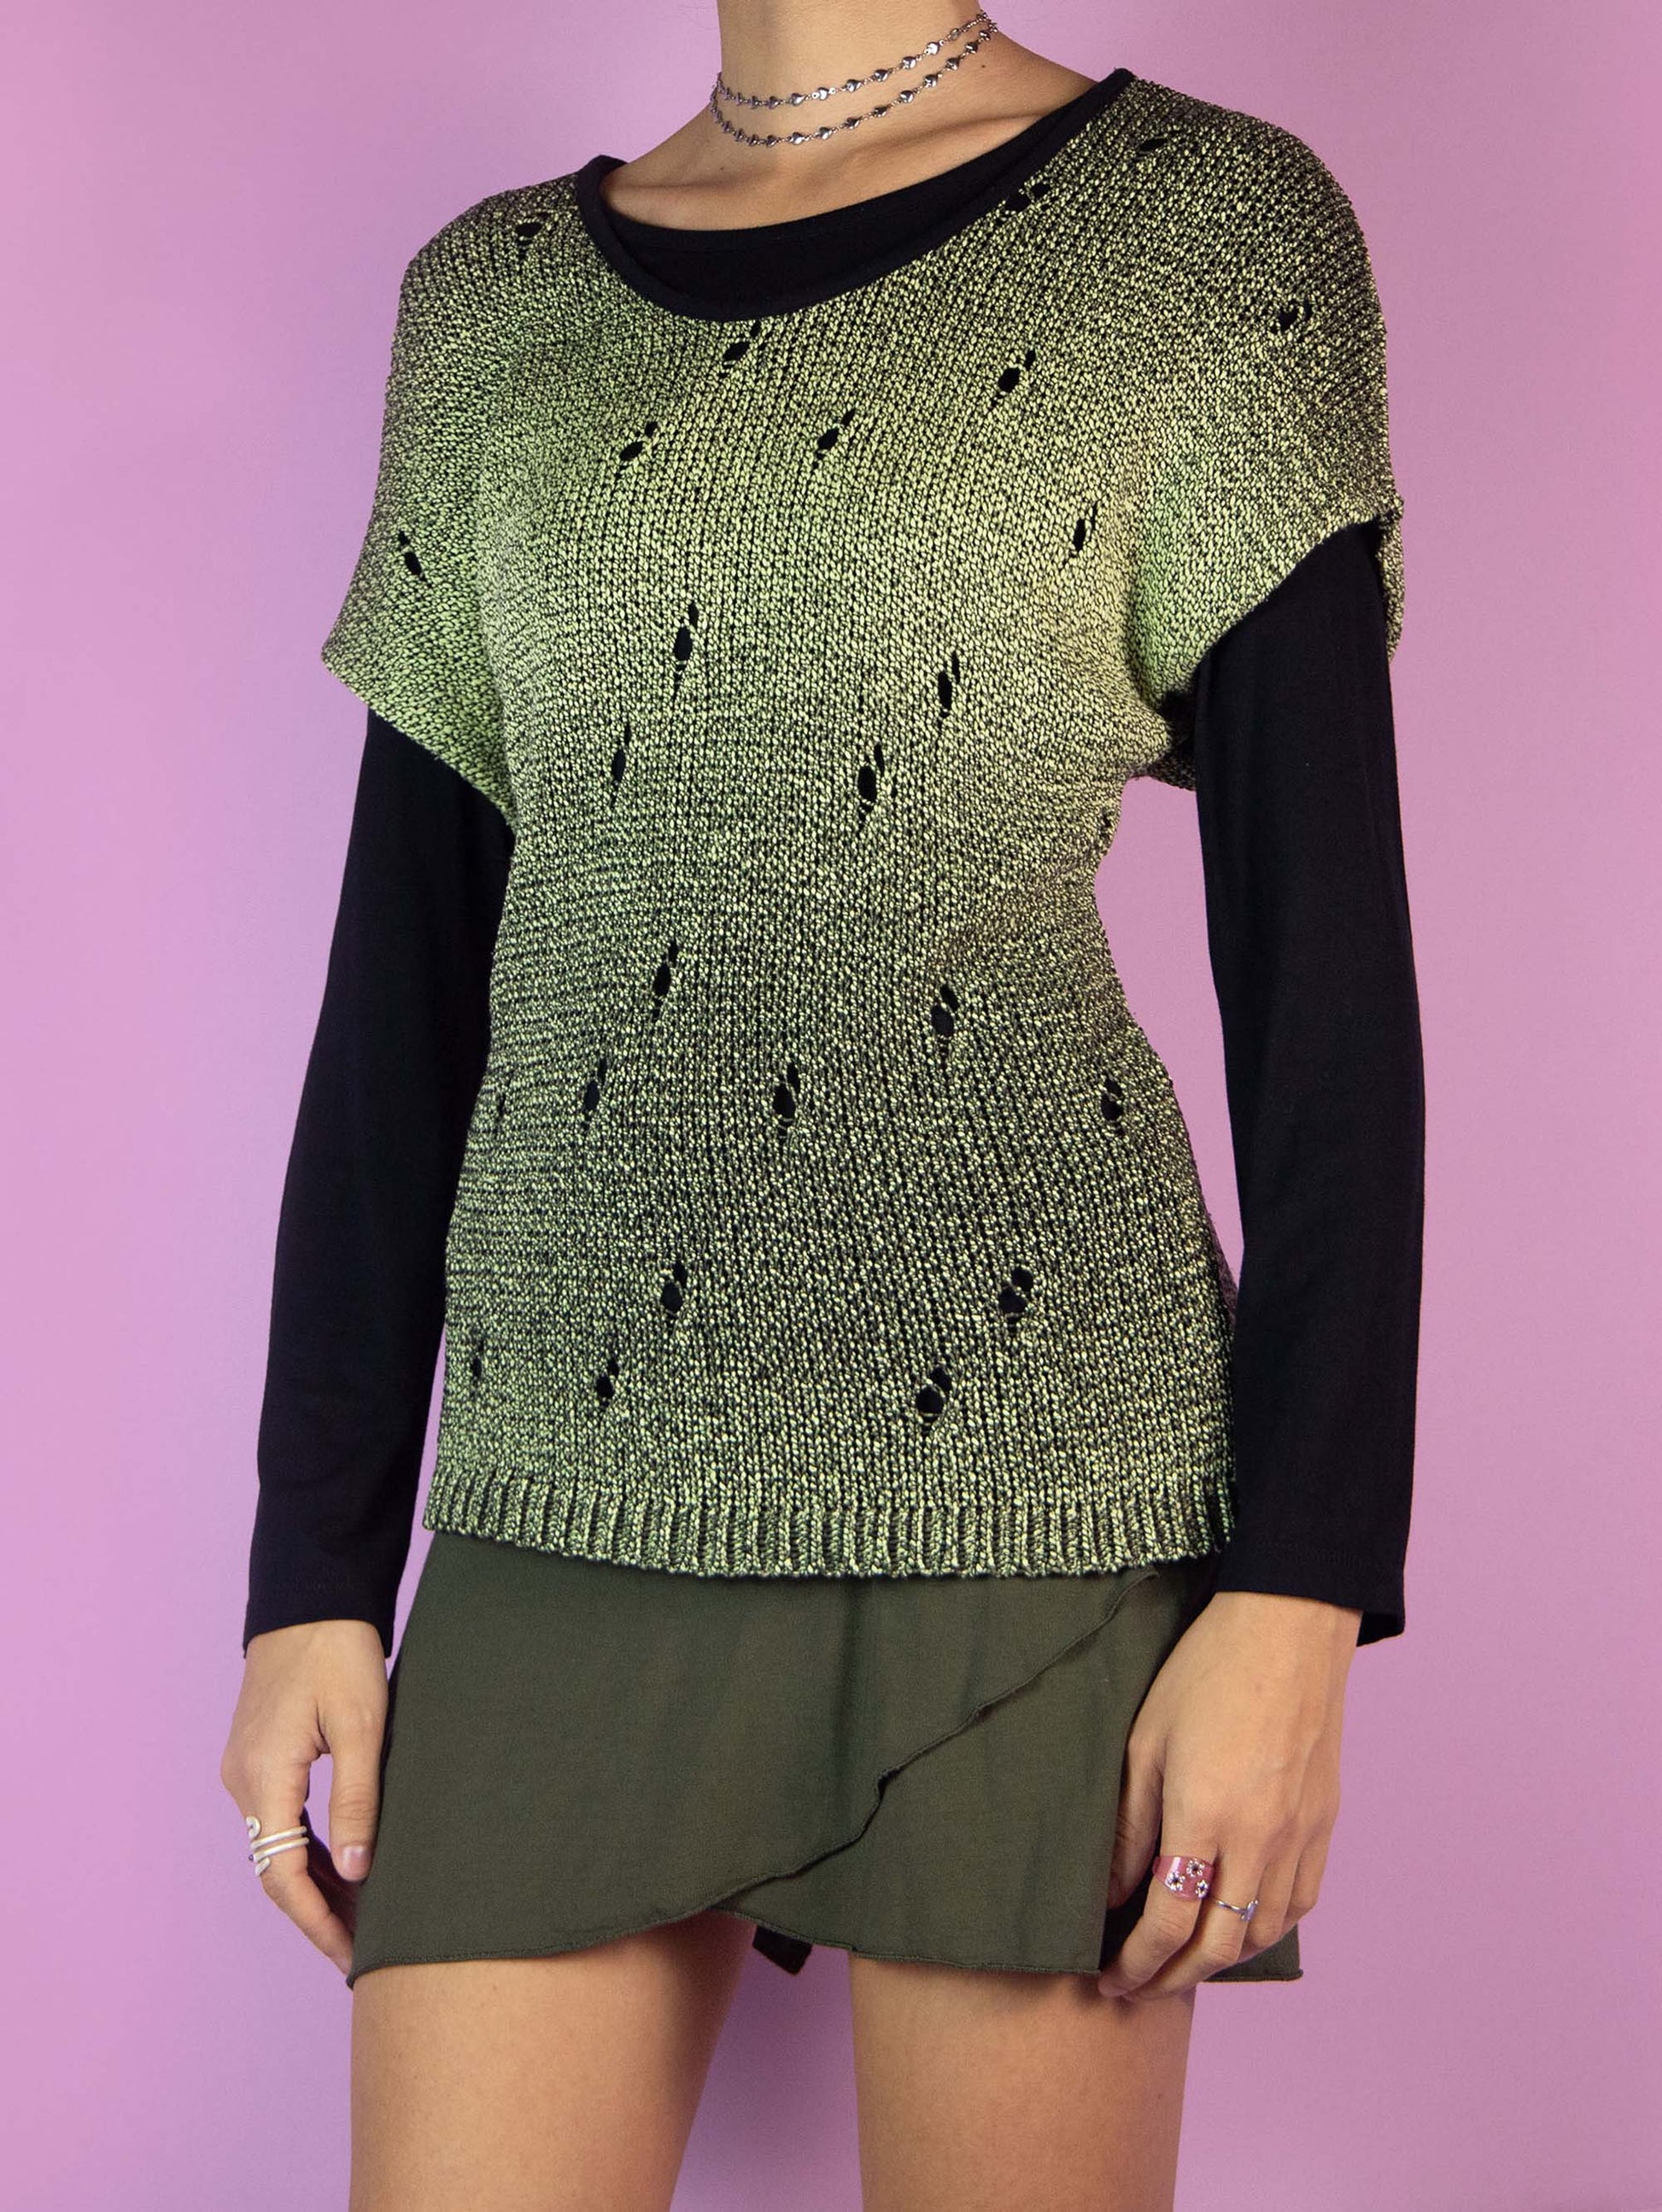 The Y2K Subversive Grunge Knit Top is a vintage long-sleeved double-layer black and green shirt. Cyber goth 2000s distressed crochet sweater.